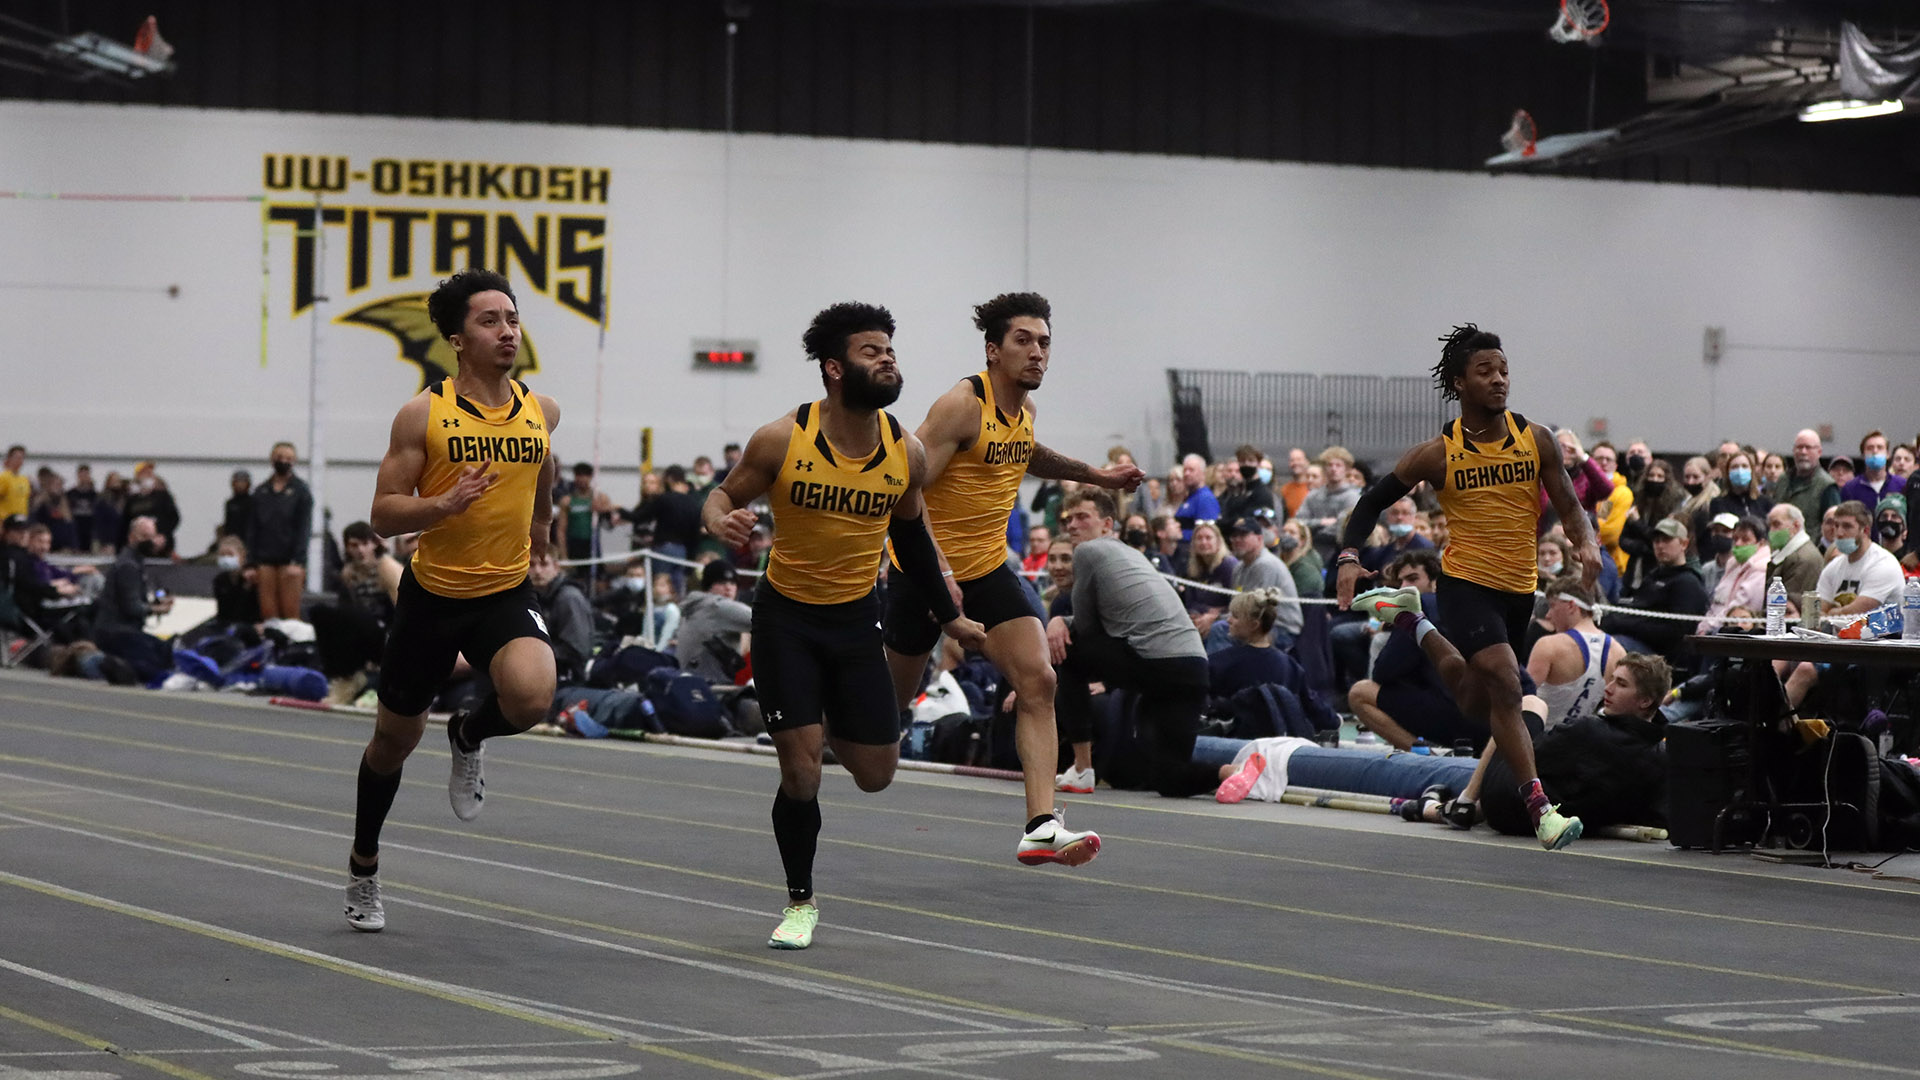 Jaylen Grant (second from left) recorded the fifth-fastest indoor 60-meter dash time (6.72) in NCAA Division III history at the Titan Challenge.